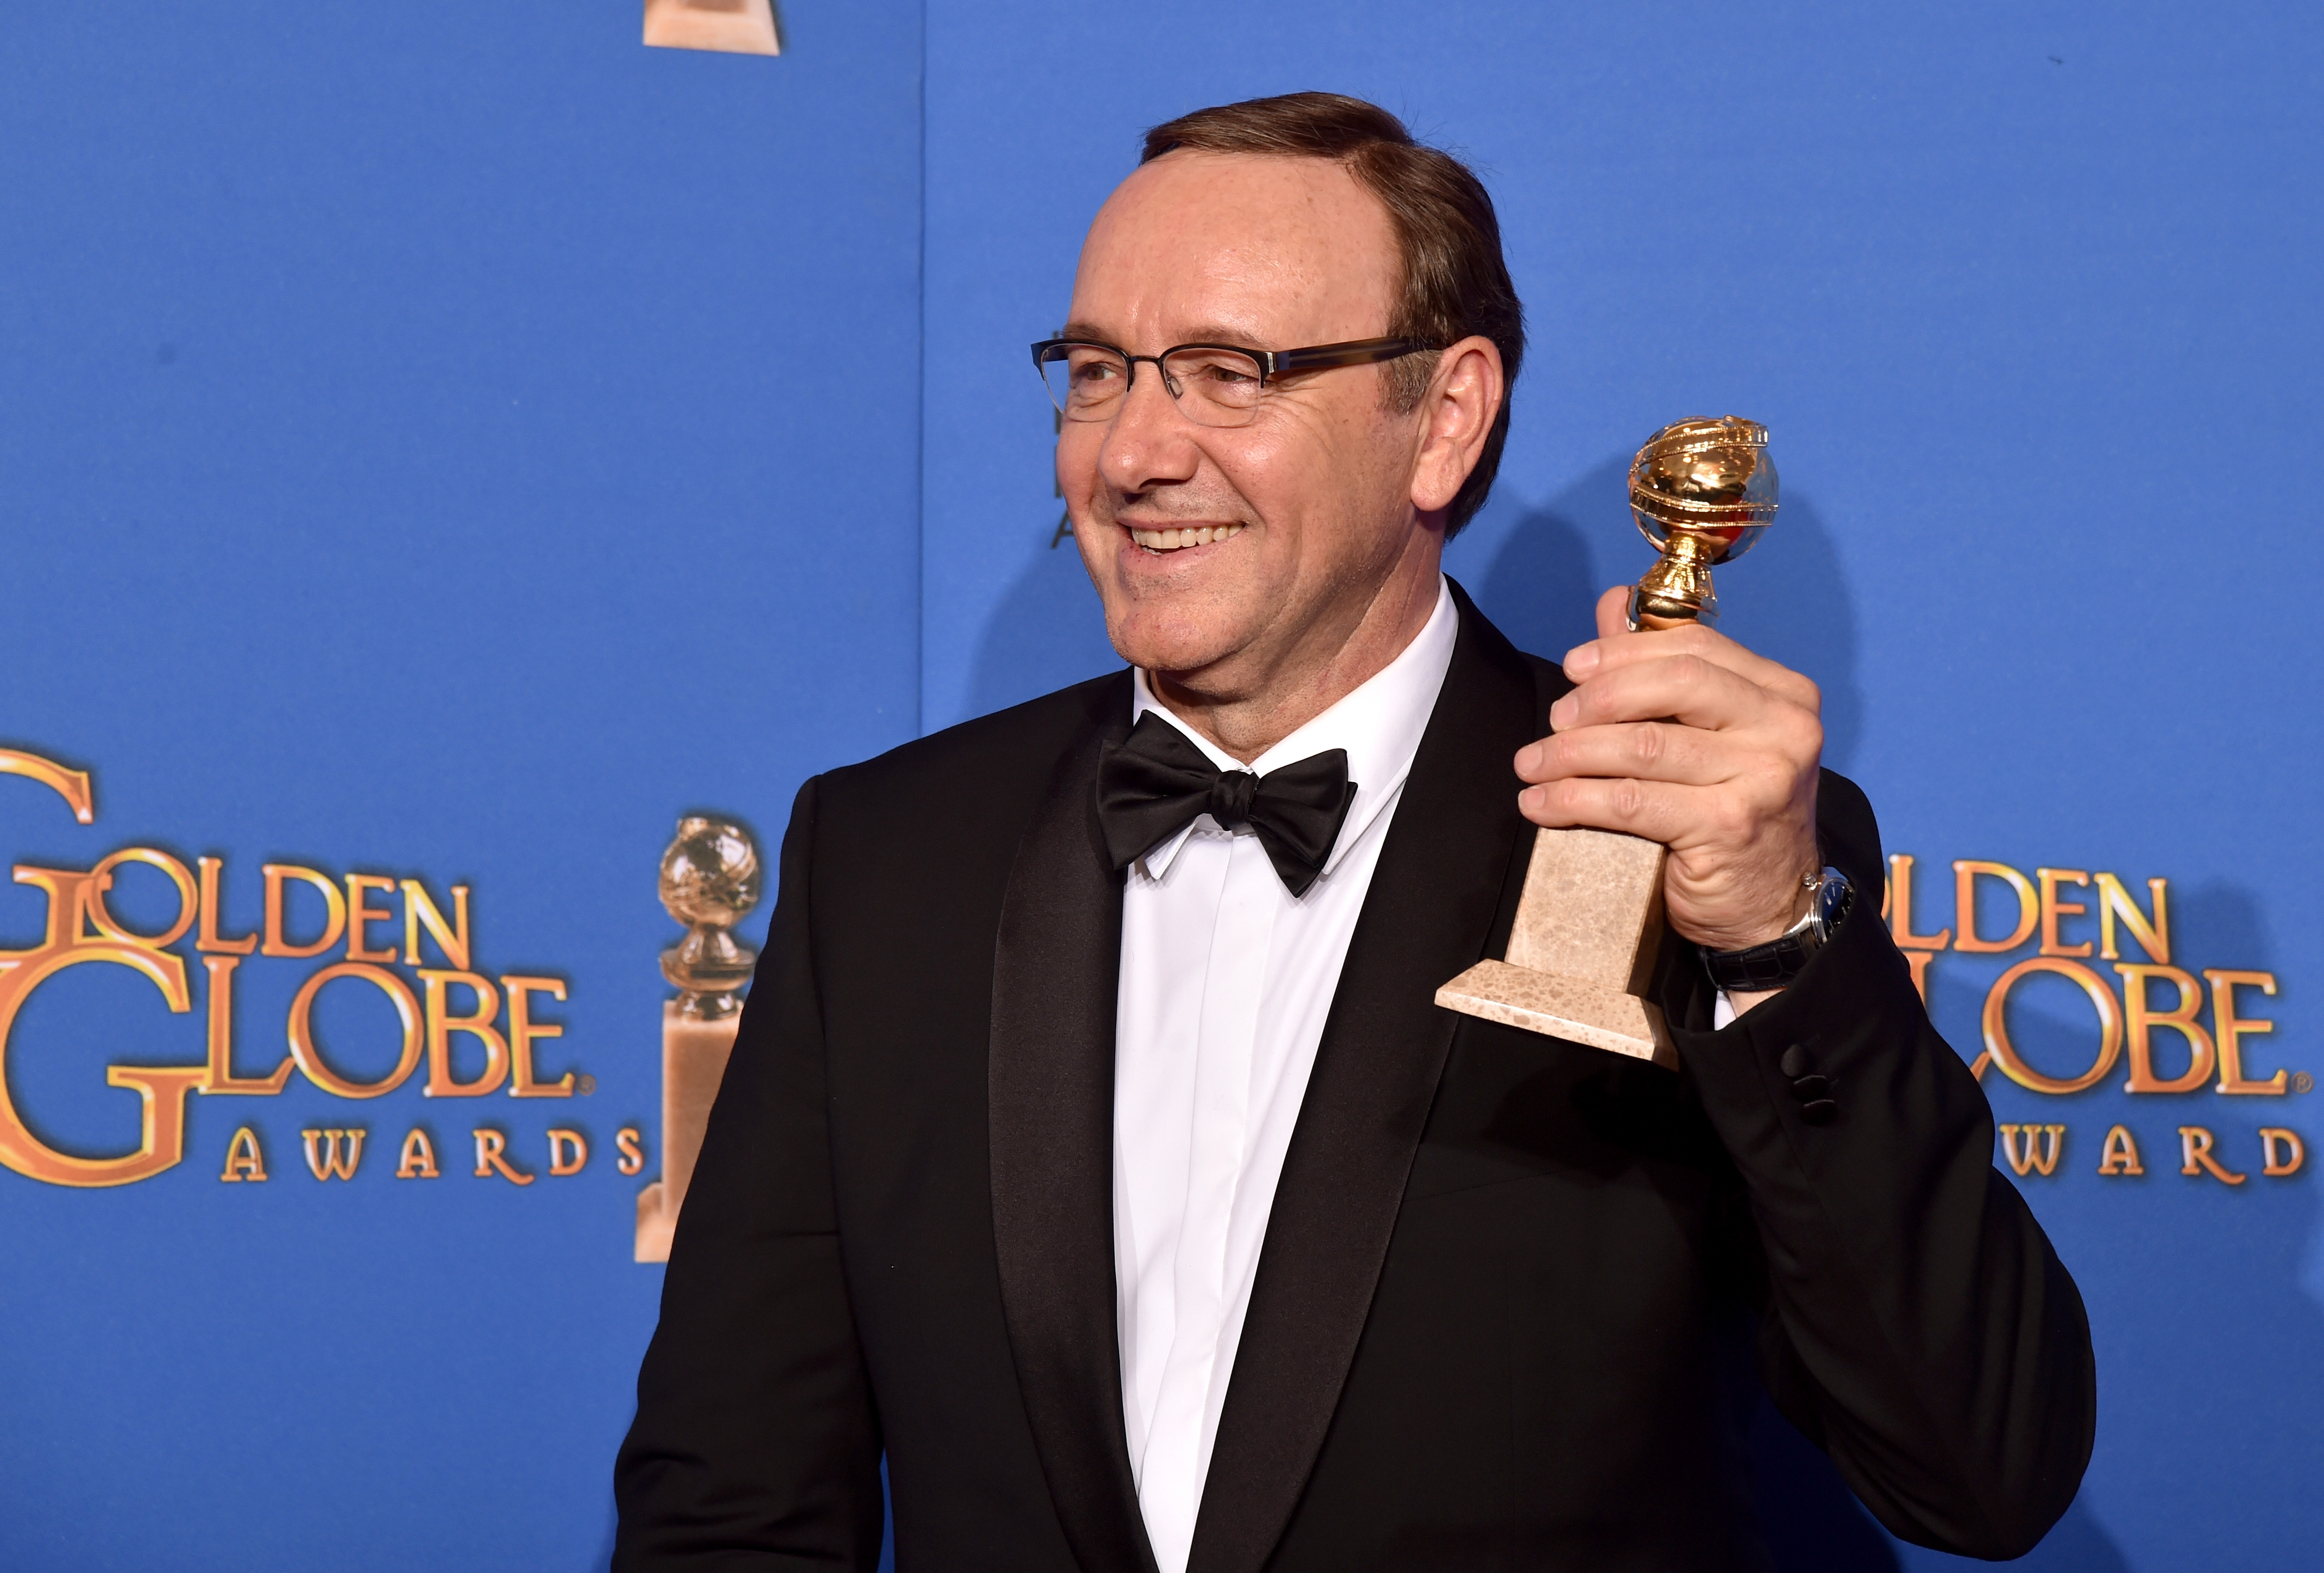 BEVERLY HILLS, CA - JANUARY 11: Actor Kevin Spacey, winner of Best Actor in a Television Series - Drama for 'House of Cards,' poses in the press room during the 72nd Annual Golden Globe Awards at The Beverly Hilton Hotel on January 11, 2015 in Beverly Hills, California. (Photo by Kevin Winter/Getty Images)